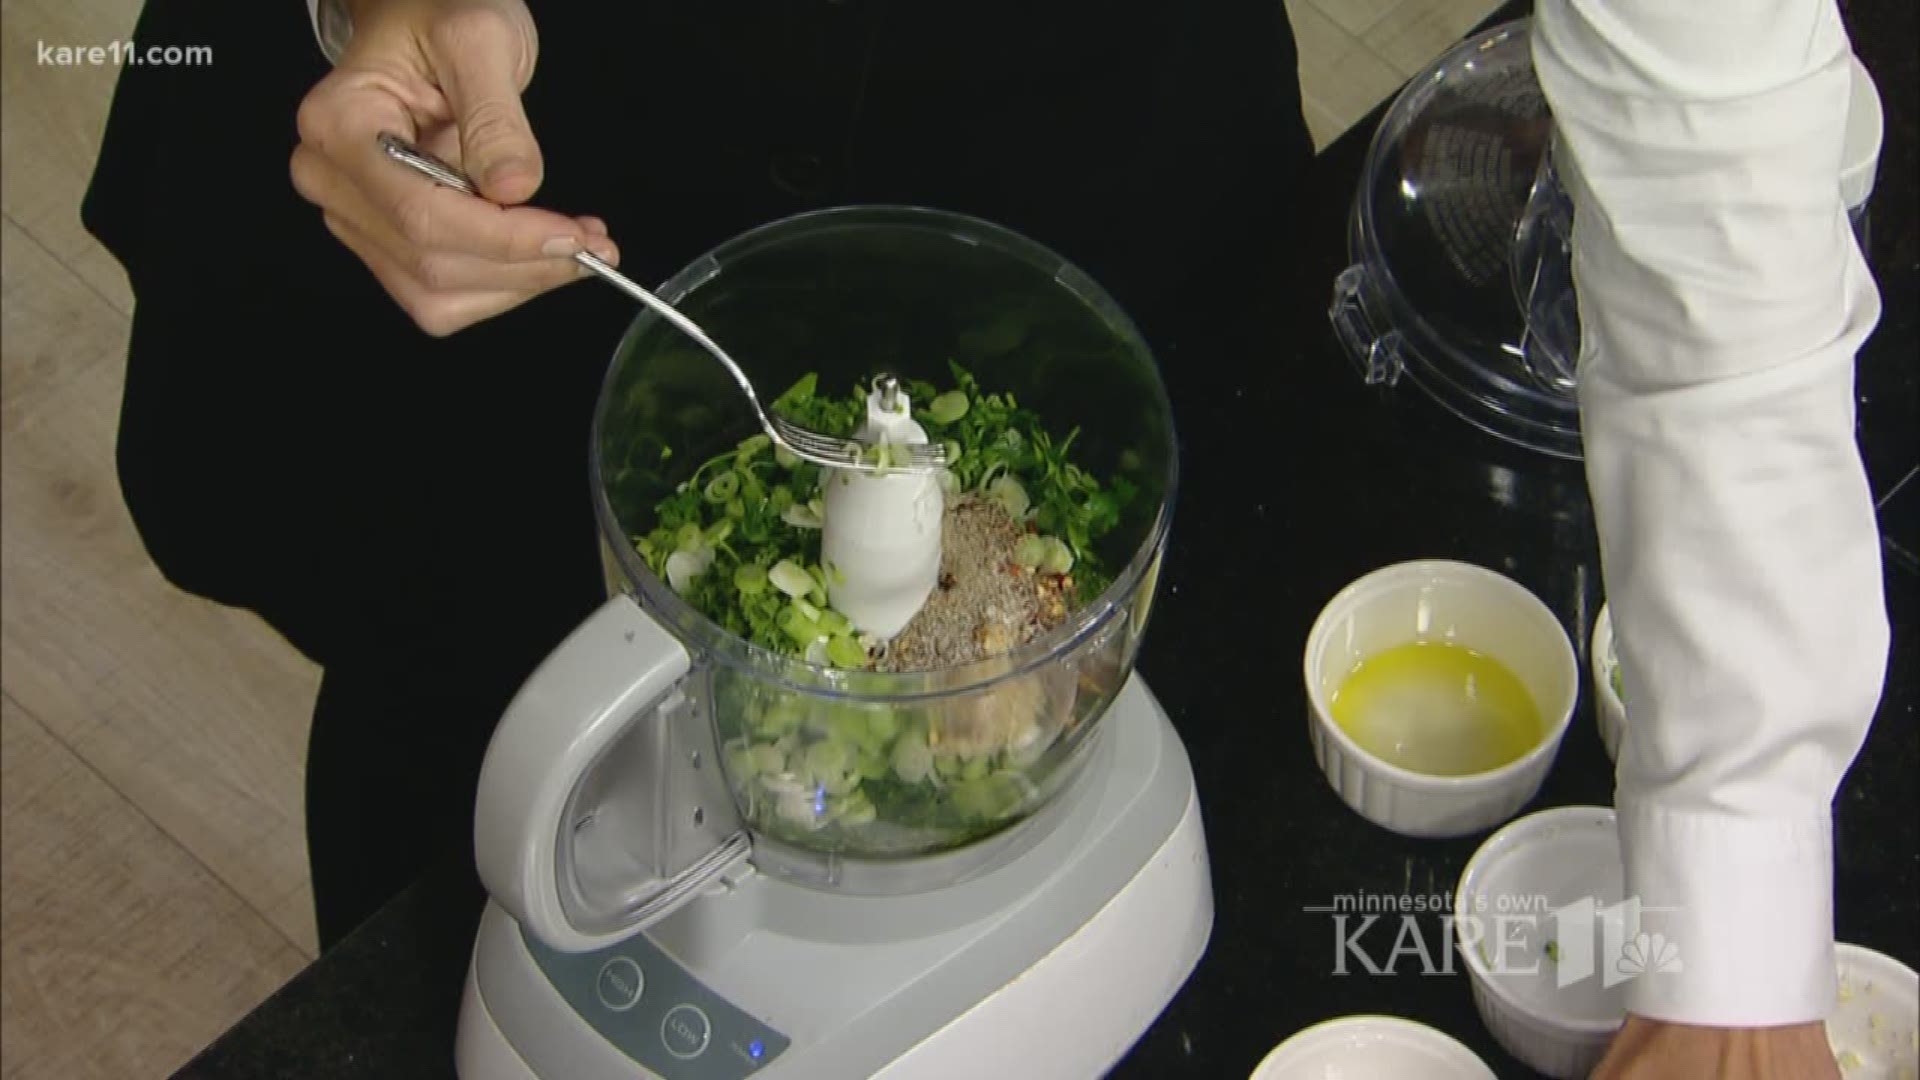 Producer of WCCO Radio's Chad Hartman Show Lindsay Guentzel joins Kare to share a cilantro lime chicken instant pot recipe just in time for spring.